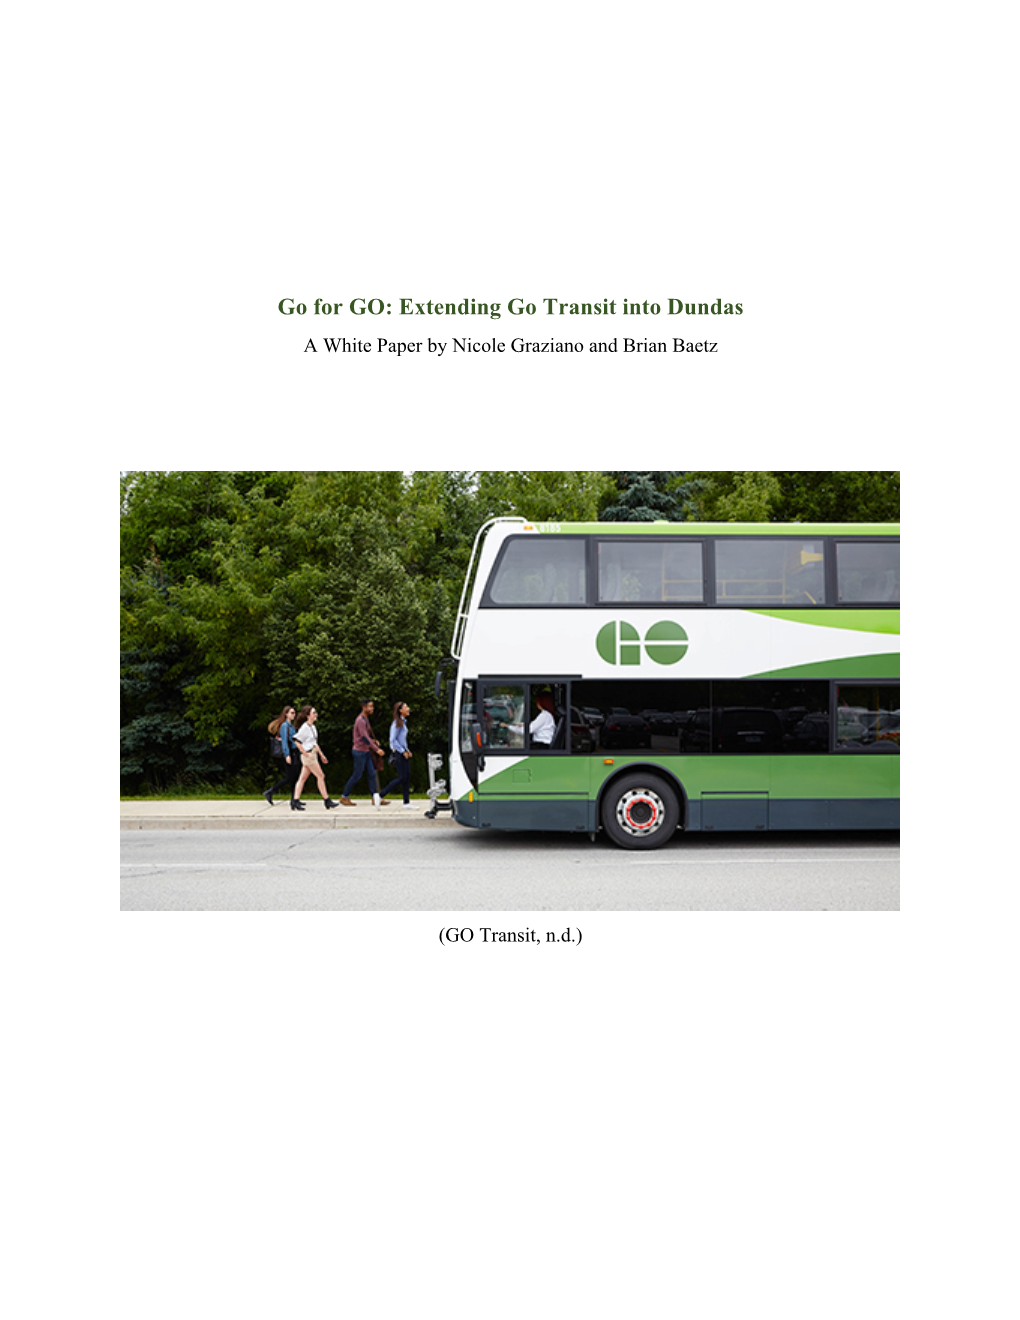 Go for GO: Extending Go Transit Into Dundas a White Paper by Nicole Graziano and Brian Baetz